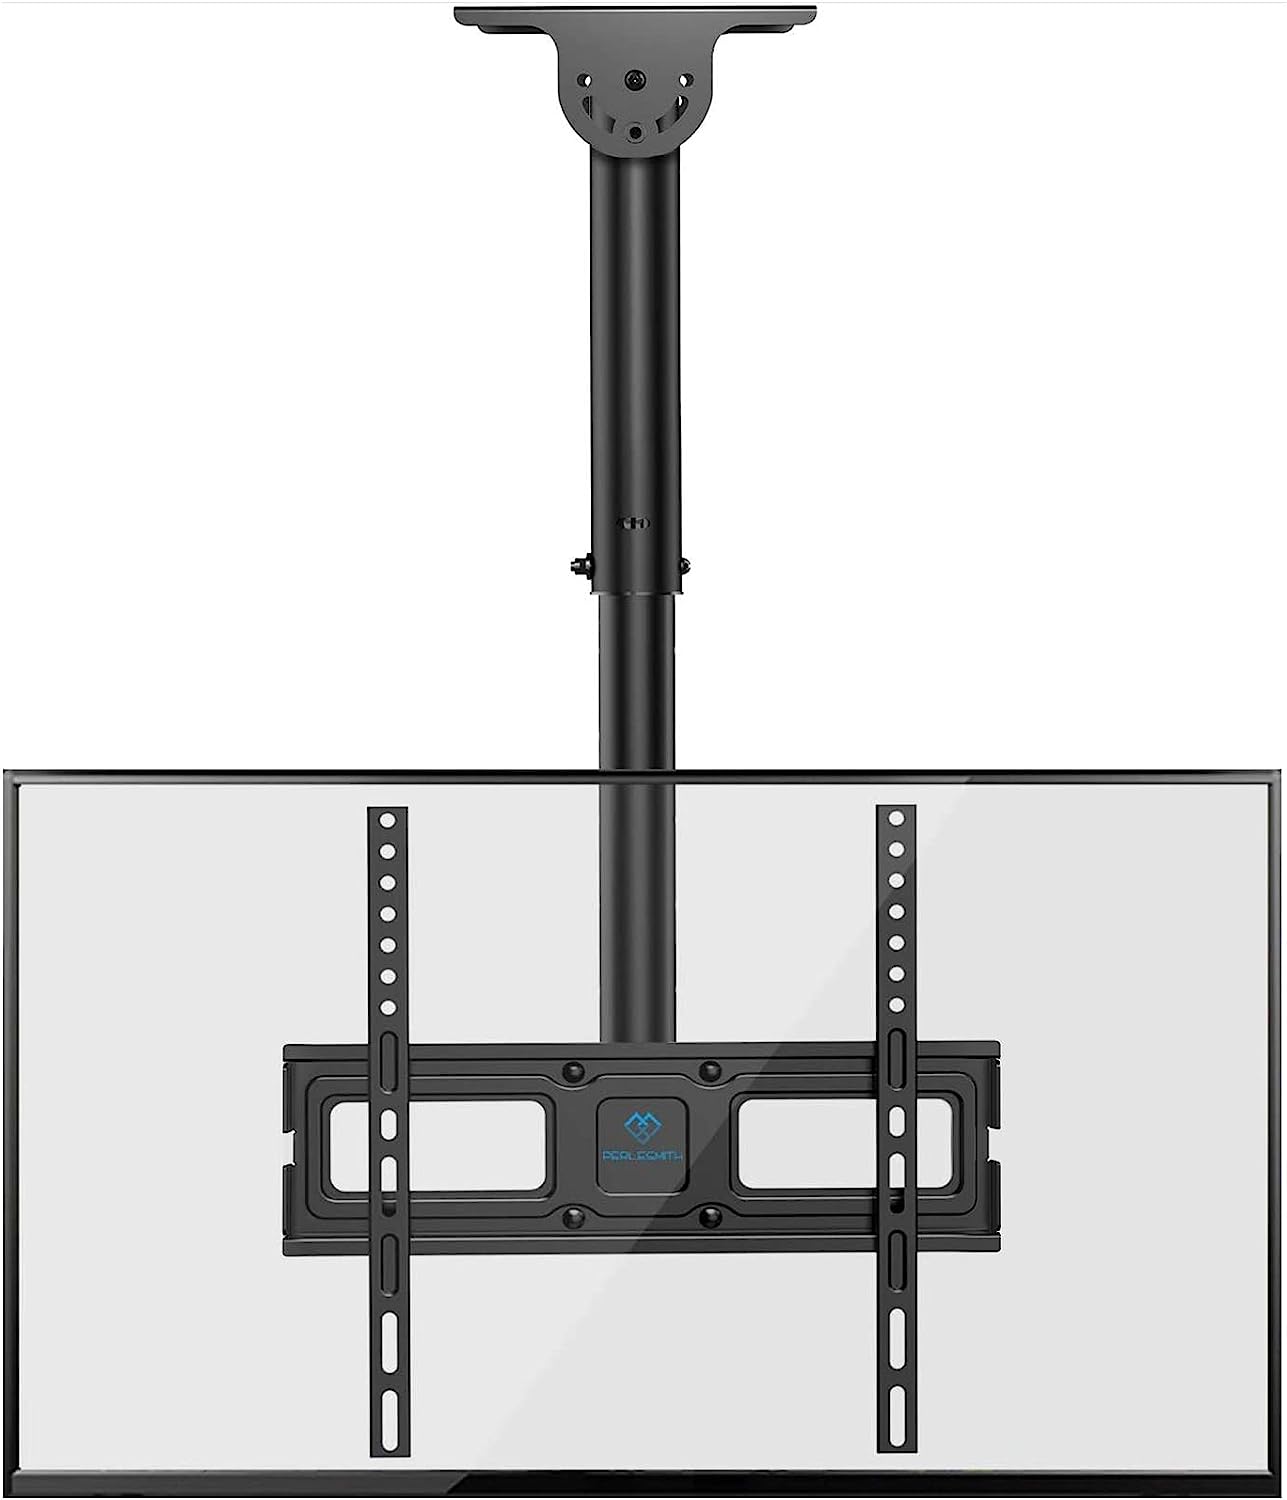 Prime Members: PERLESMITH Ceiling Mount for 26-65 inch Flat Screen Displays, Hanging Adjustable Ceiling Bracket Fits Most LCD LED OLED 4K TVs, Pole Mount Holds up to 110lbs $19.69